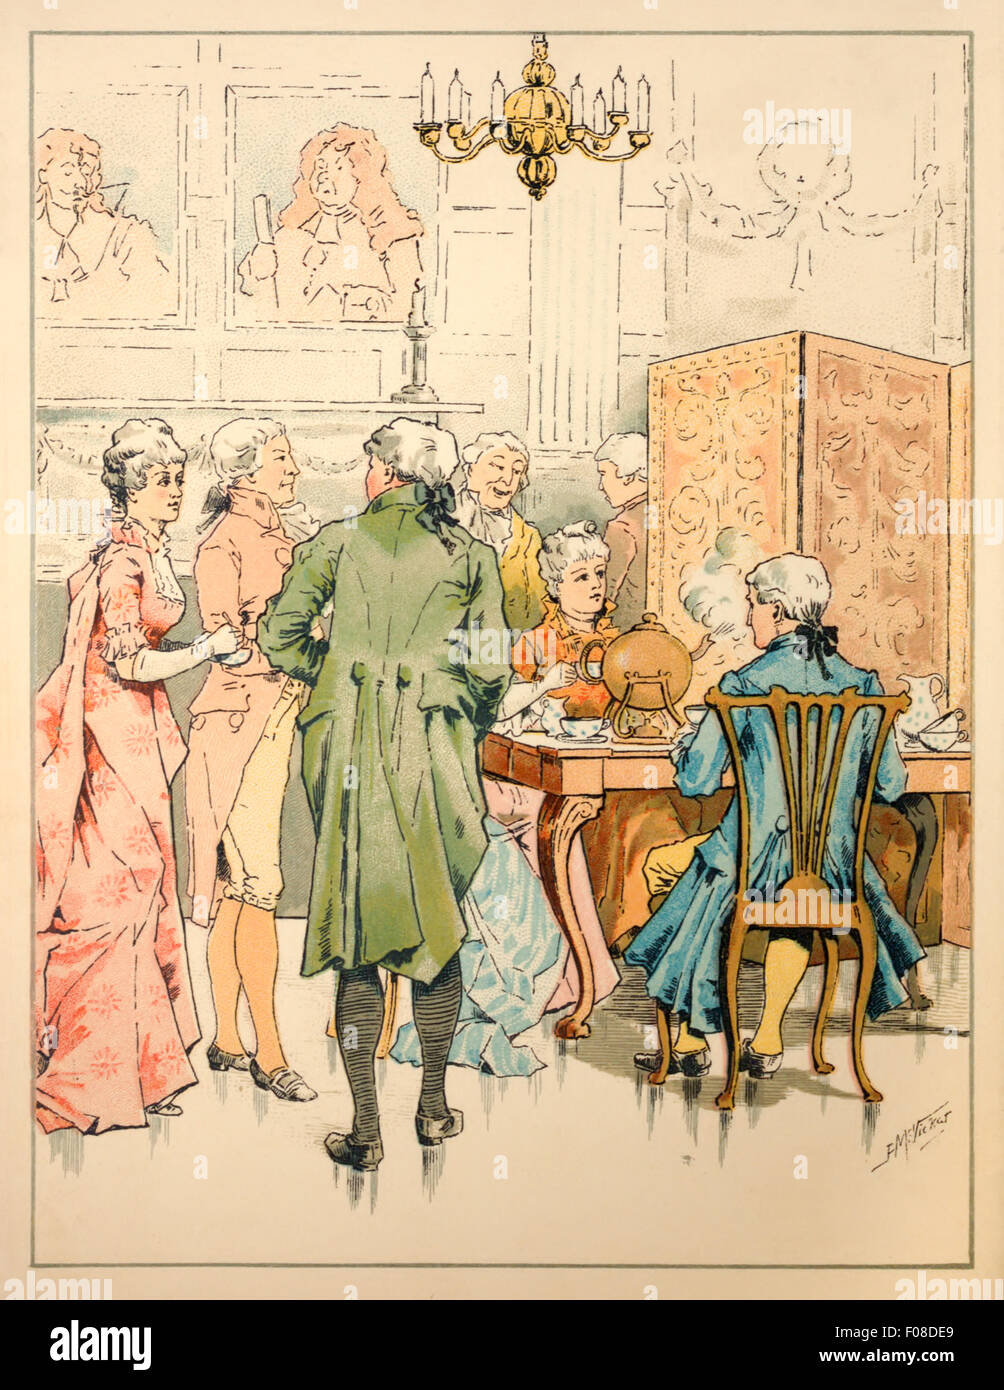 Frontipiece showing ladies and gentlemen taking tea. Illustration by Josephine Pollard (1834-1892). See description for more information. Stock Photo